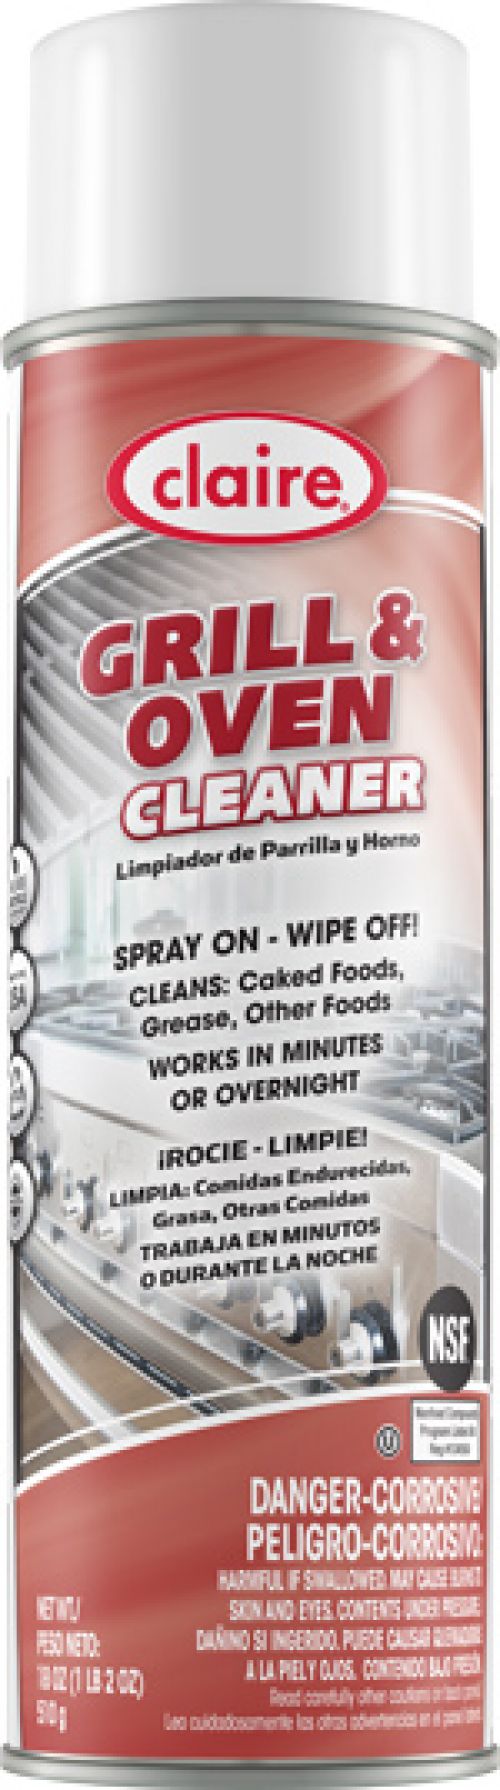 Claire Grill & Oven Cleaner Pack 12 / 18oz